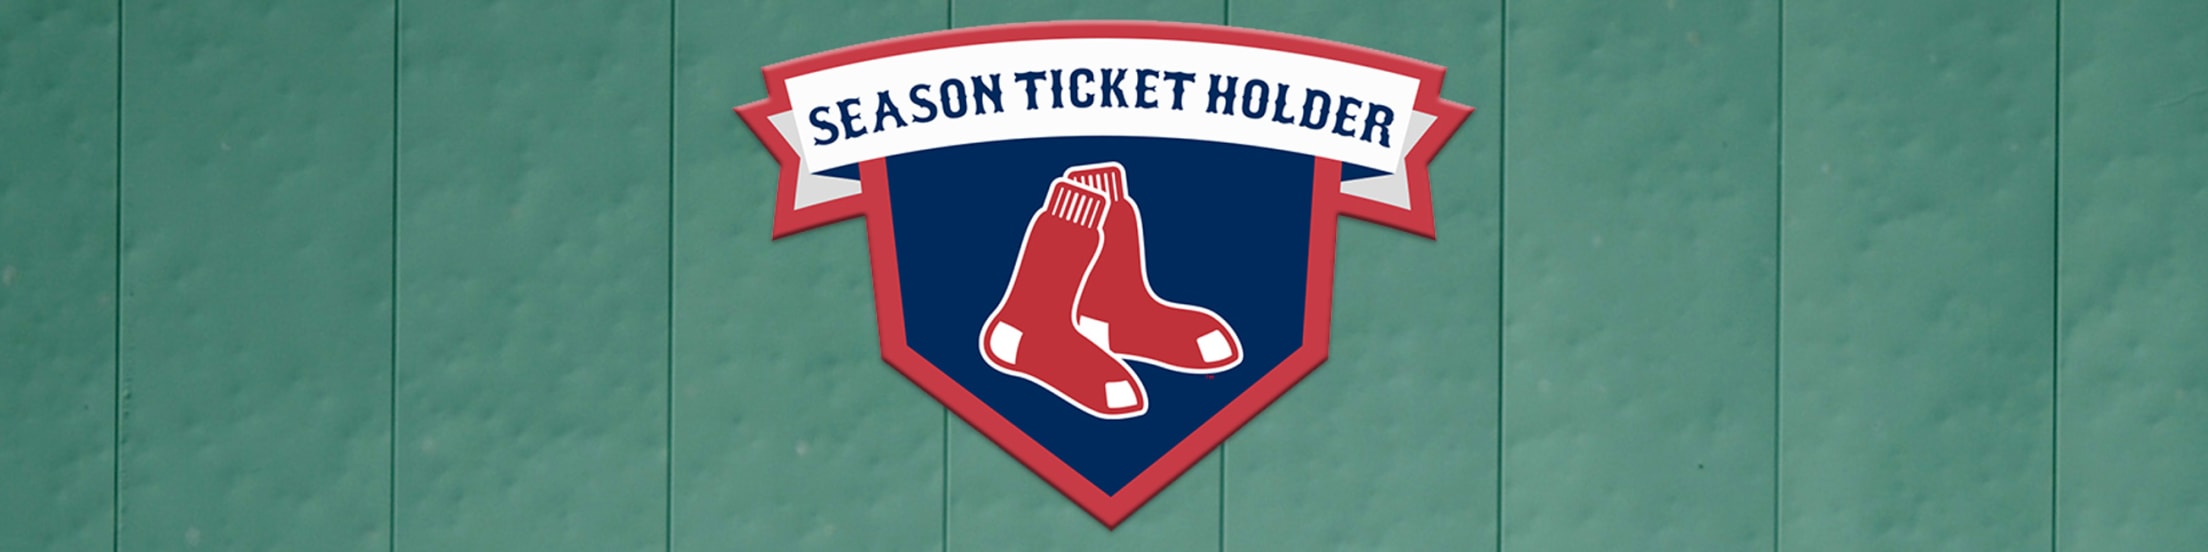 Guess who is now a season ticket holder for the Worcester Red Sox